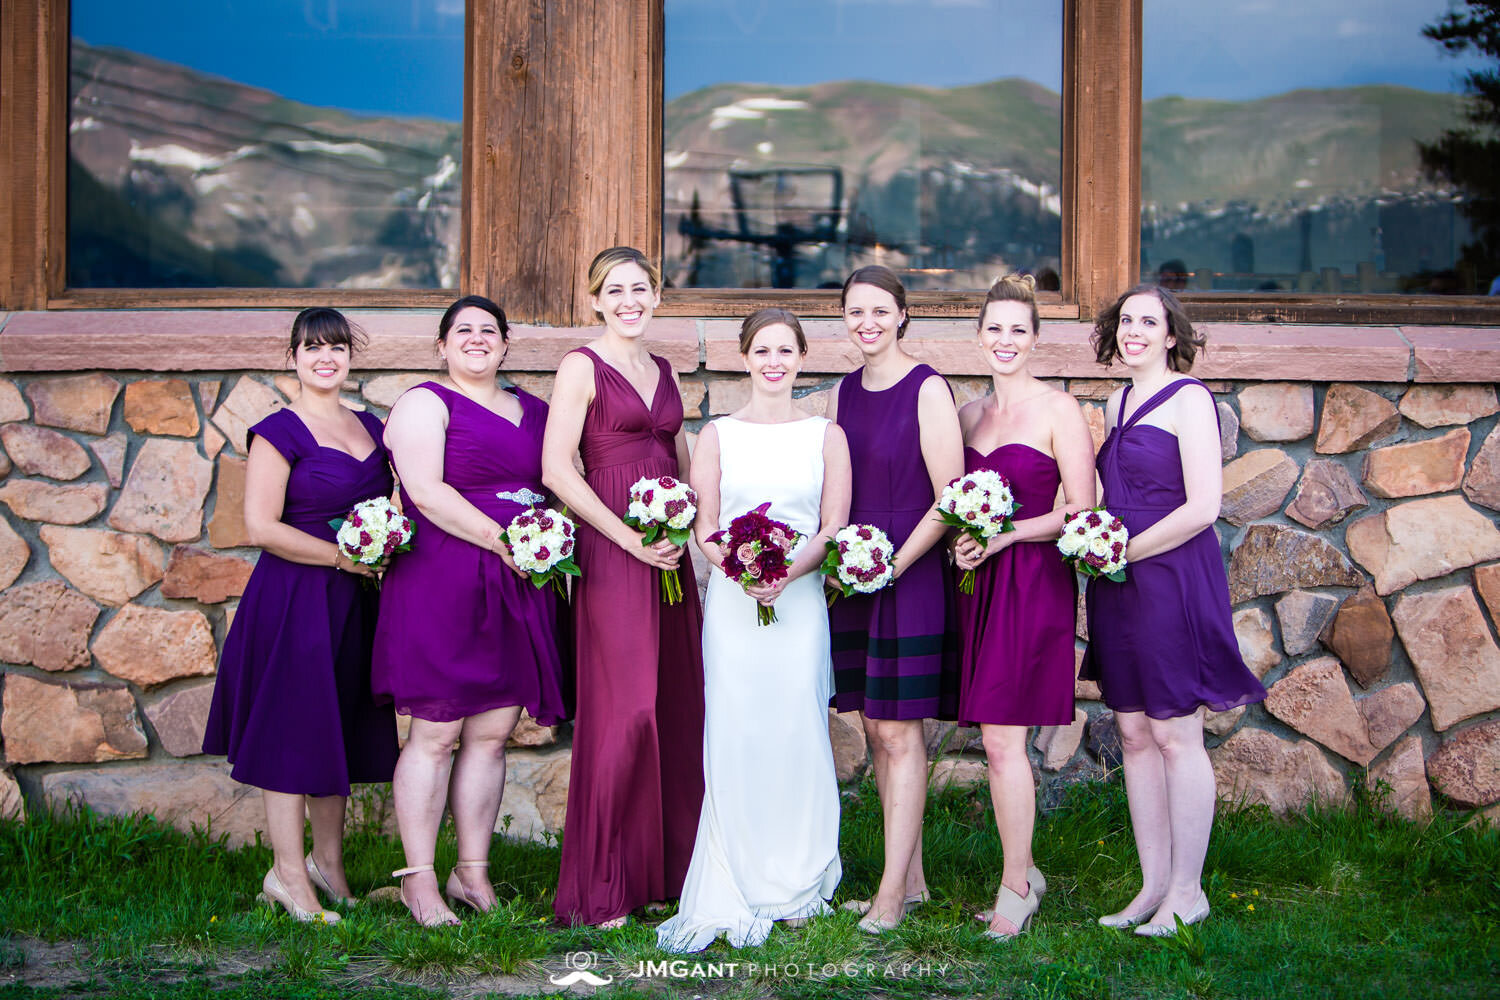  Wedding party at Winter Park wedding photographed by JMGant Photography. 